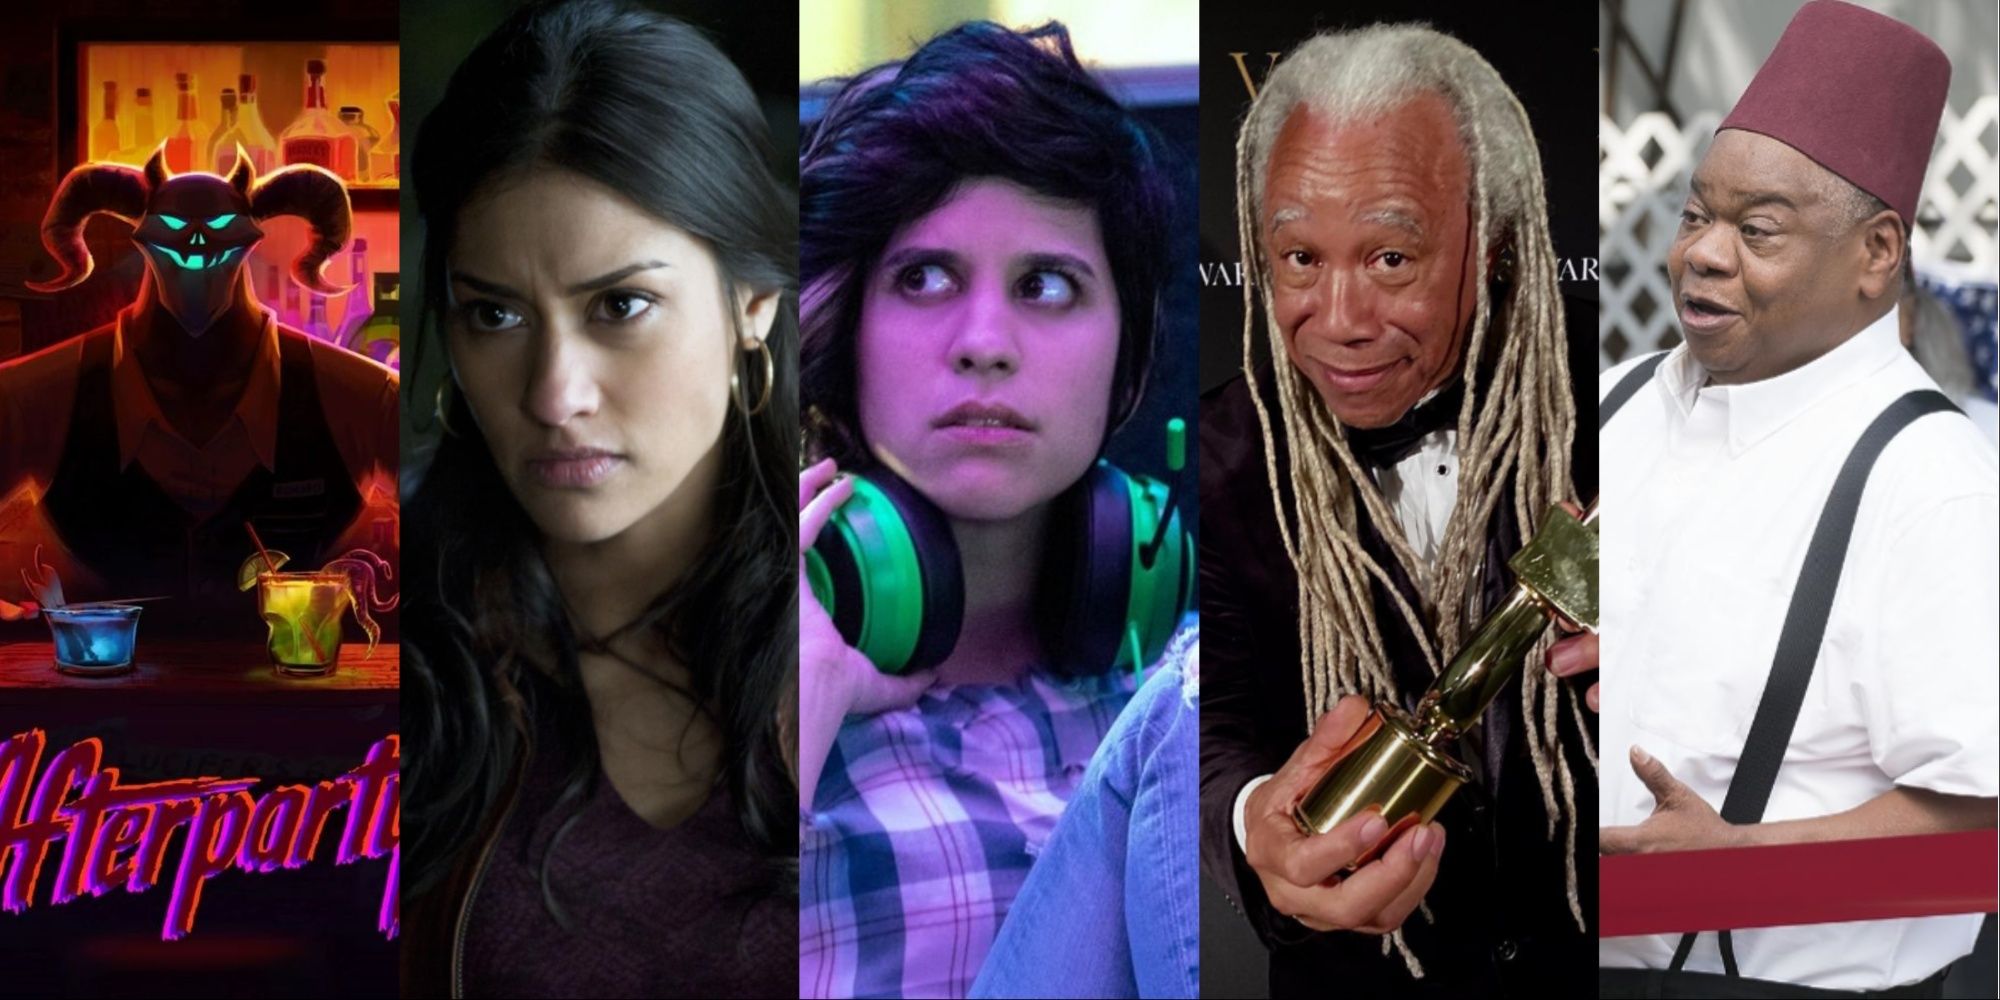 A five-image collage of the poster for Afterparty, Janina Gavankar in True Blood, Ashly Burch wearing a gaming headset, Dave Fennoy with an award, and Paul Bates in Modern Family.